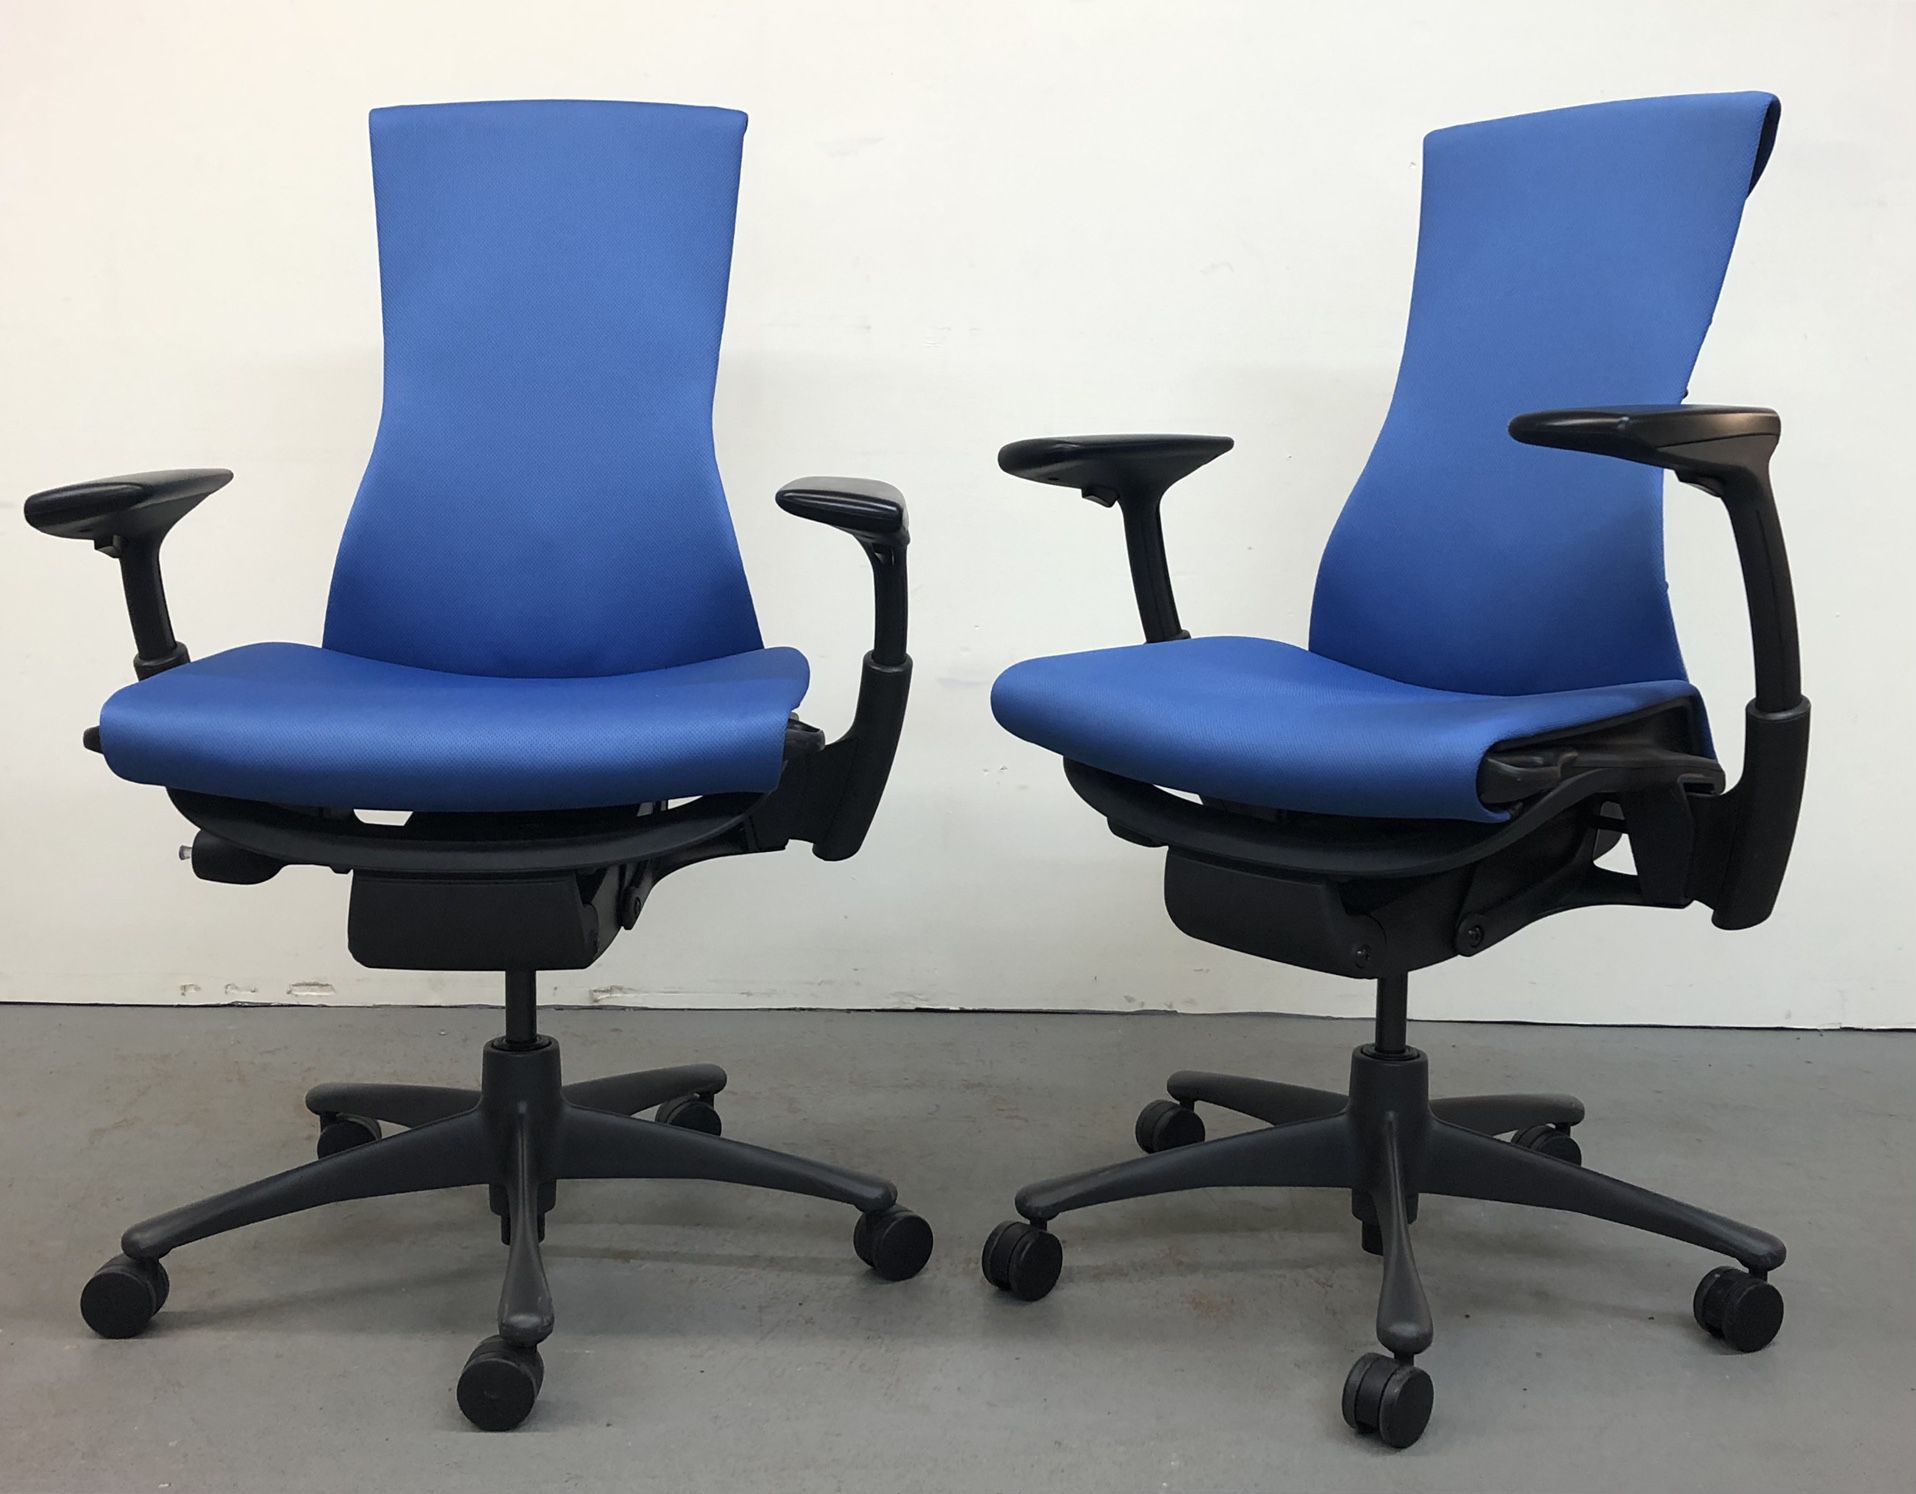 efterspørgsel Håbefuld tung Herman Miller Embody Office Chairs 4 Ergonomic Desk Chairs Available $8 for  Sale in Seattle, WA - OfferUp